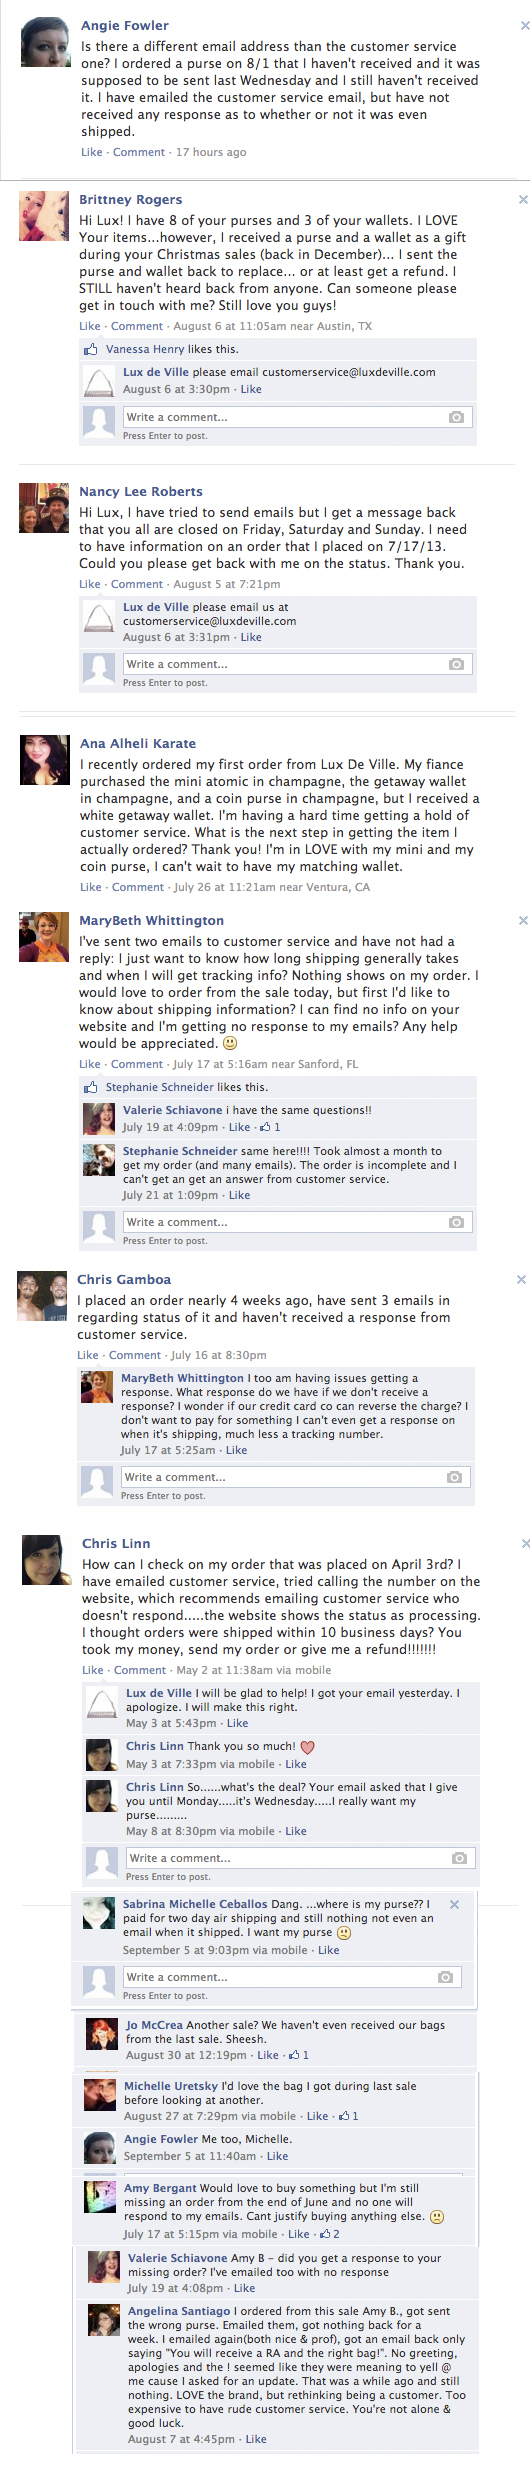 Comments of customers on Lux De Ville's Facebook page who haven't received their products.